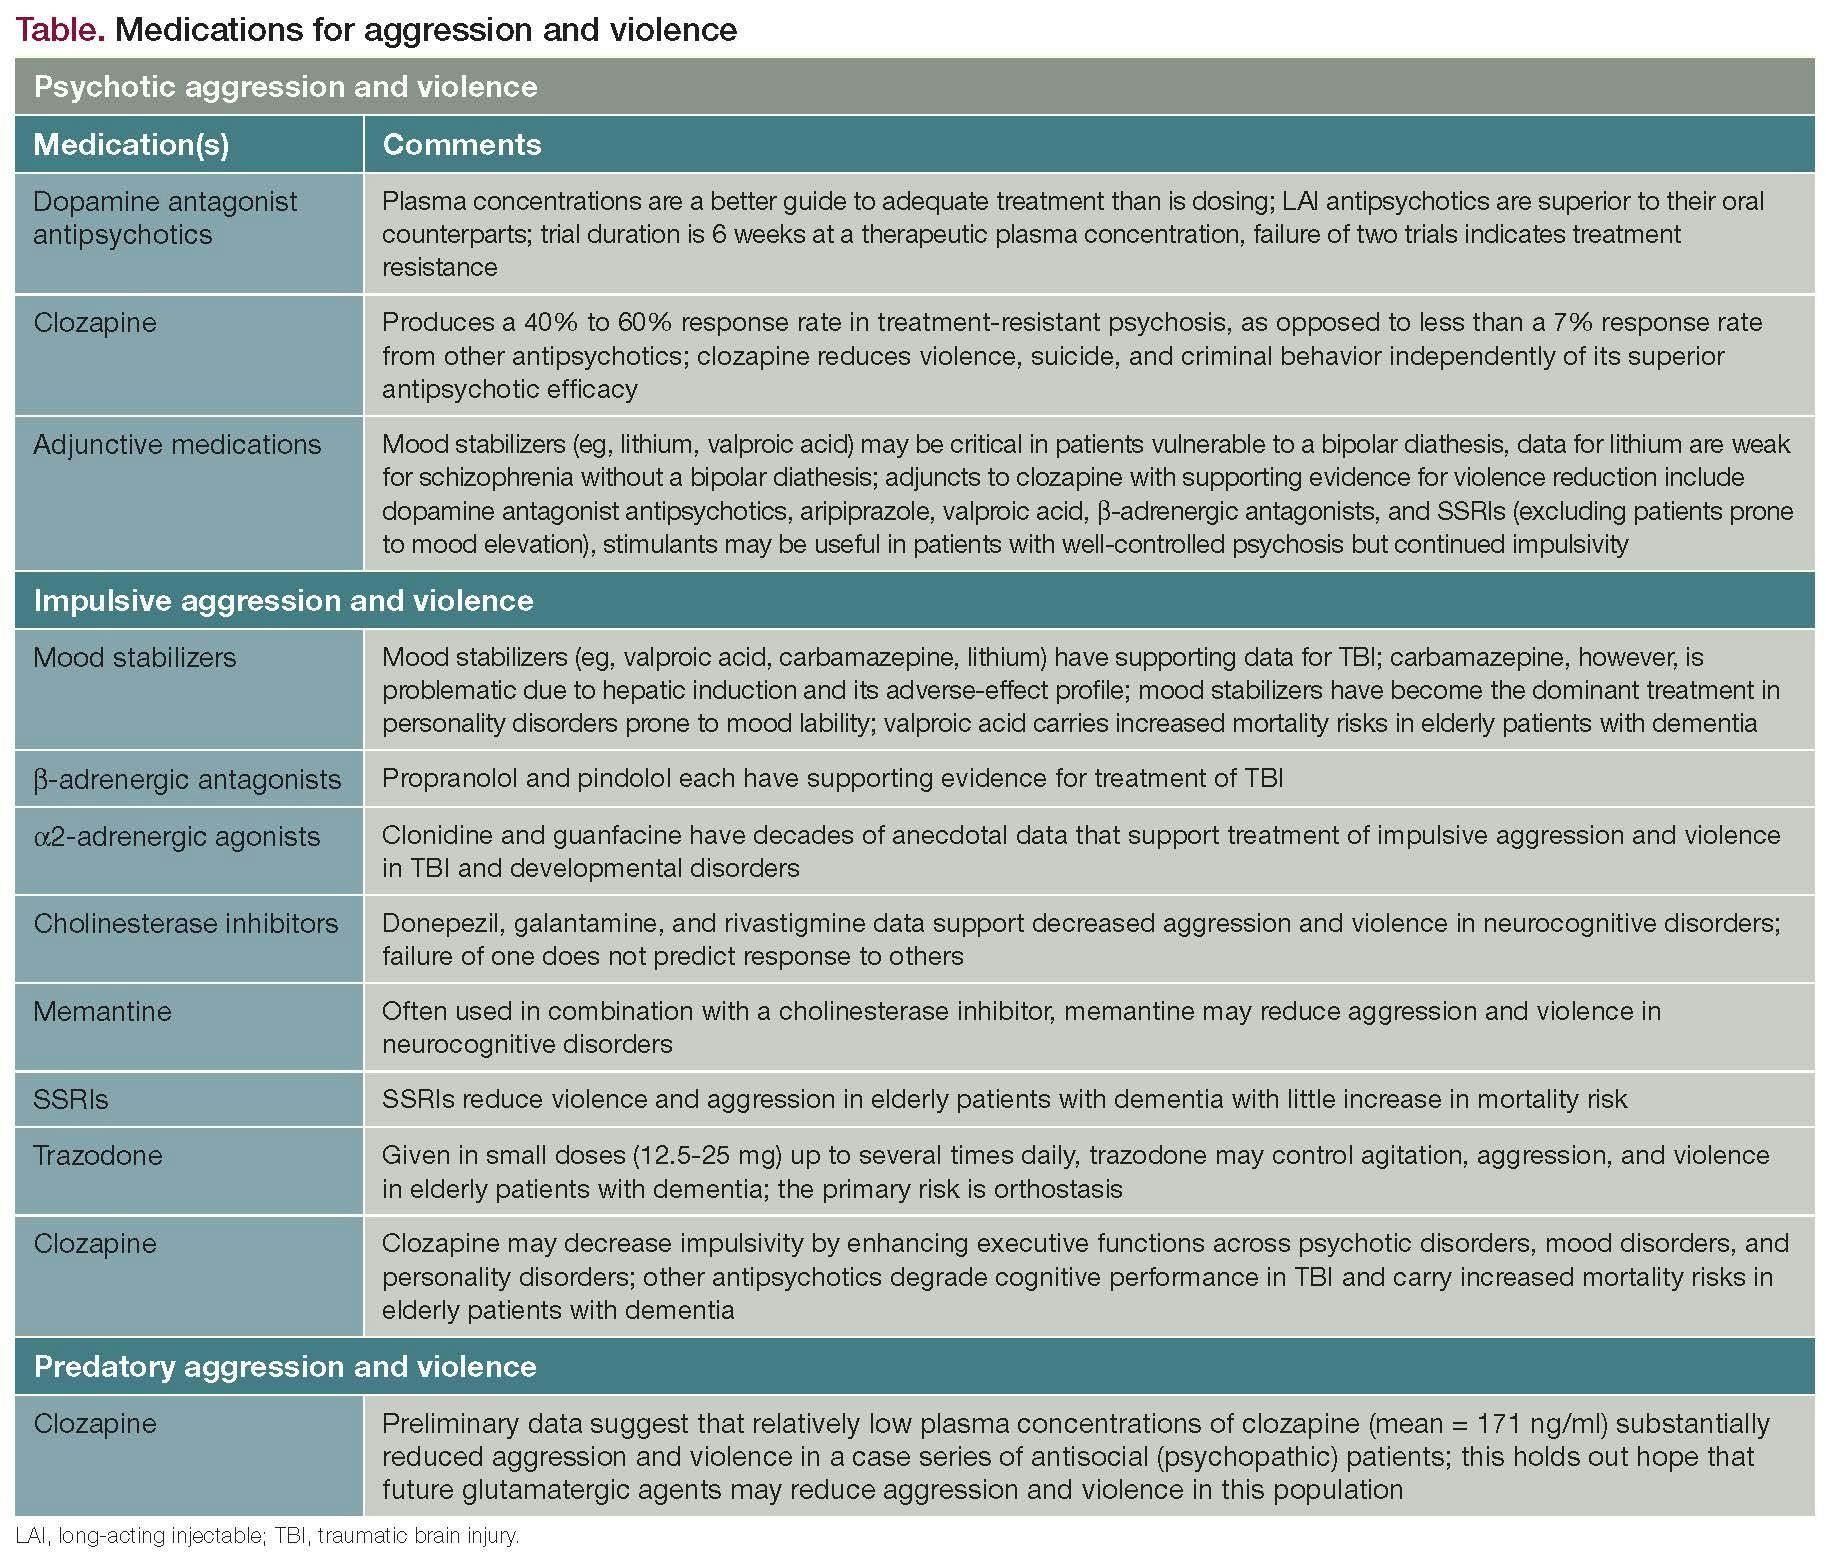 Table. Medications for aggression and violence